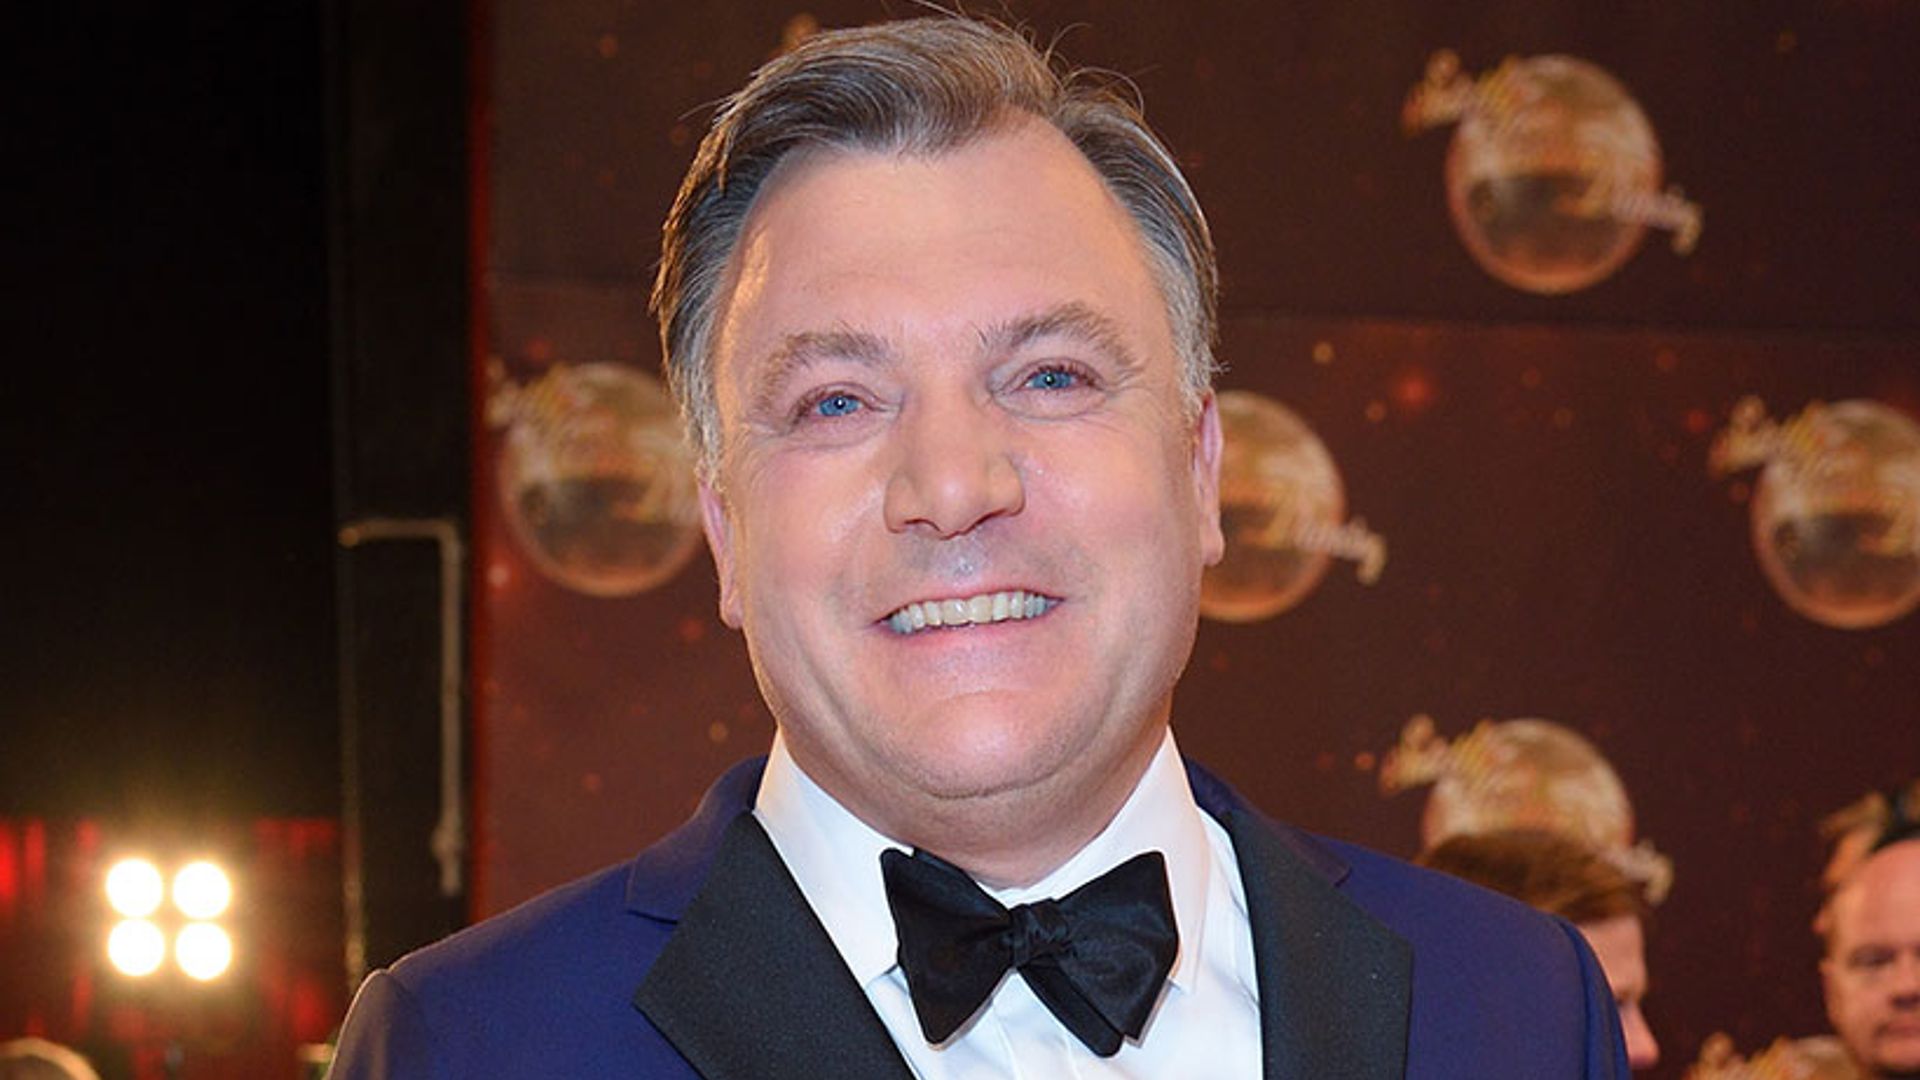 Strictly Come Dancing's Ed Balls challenges Alan Sugar to a dance-off: 'I'll raise you a Dirty Dancing lift'